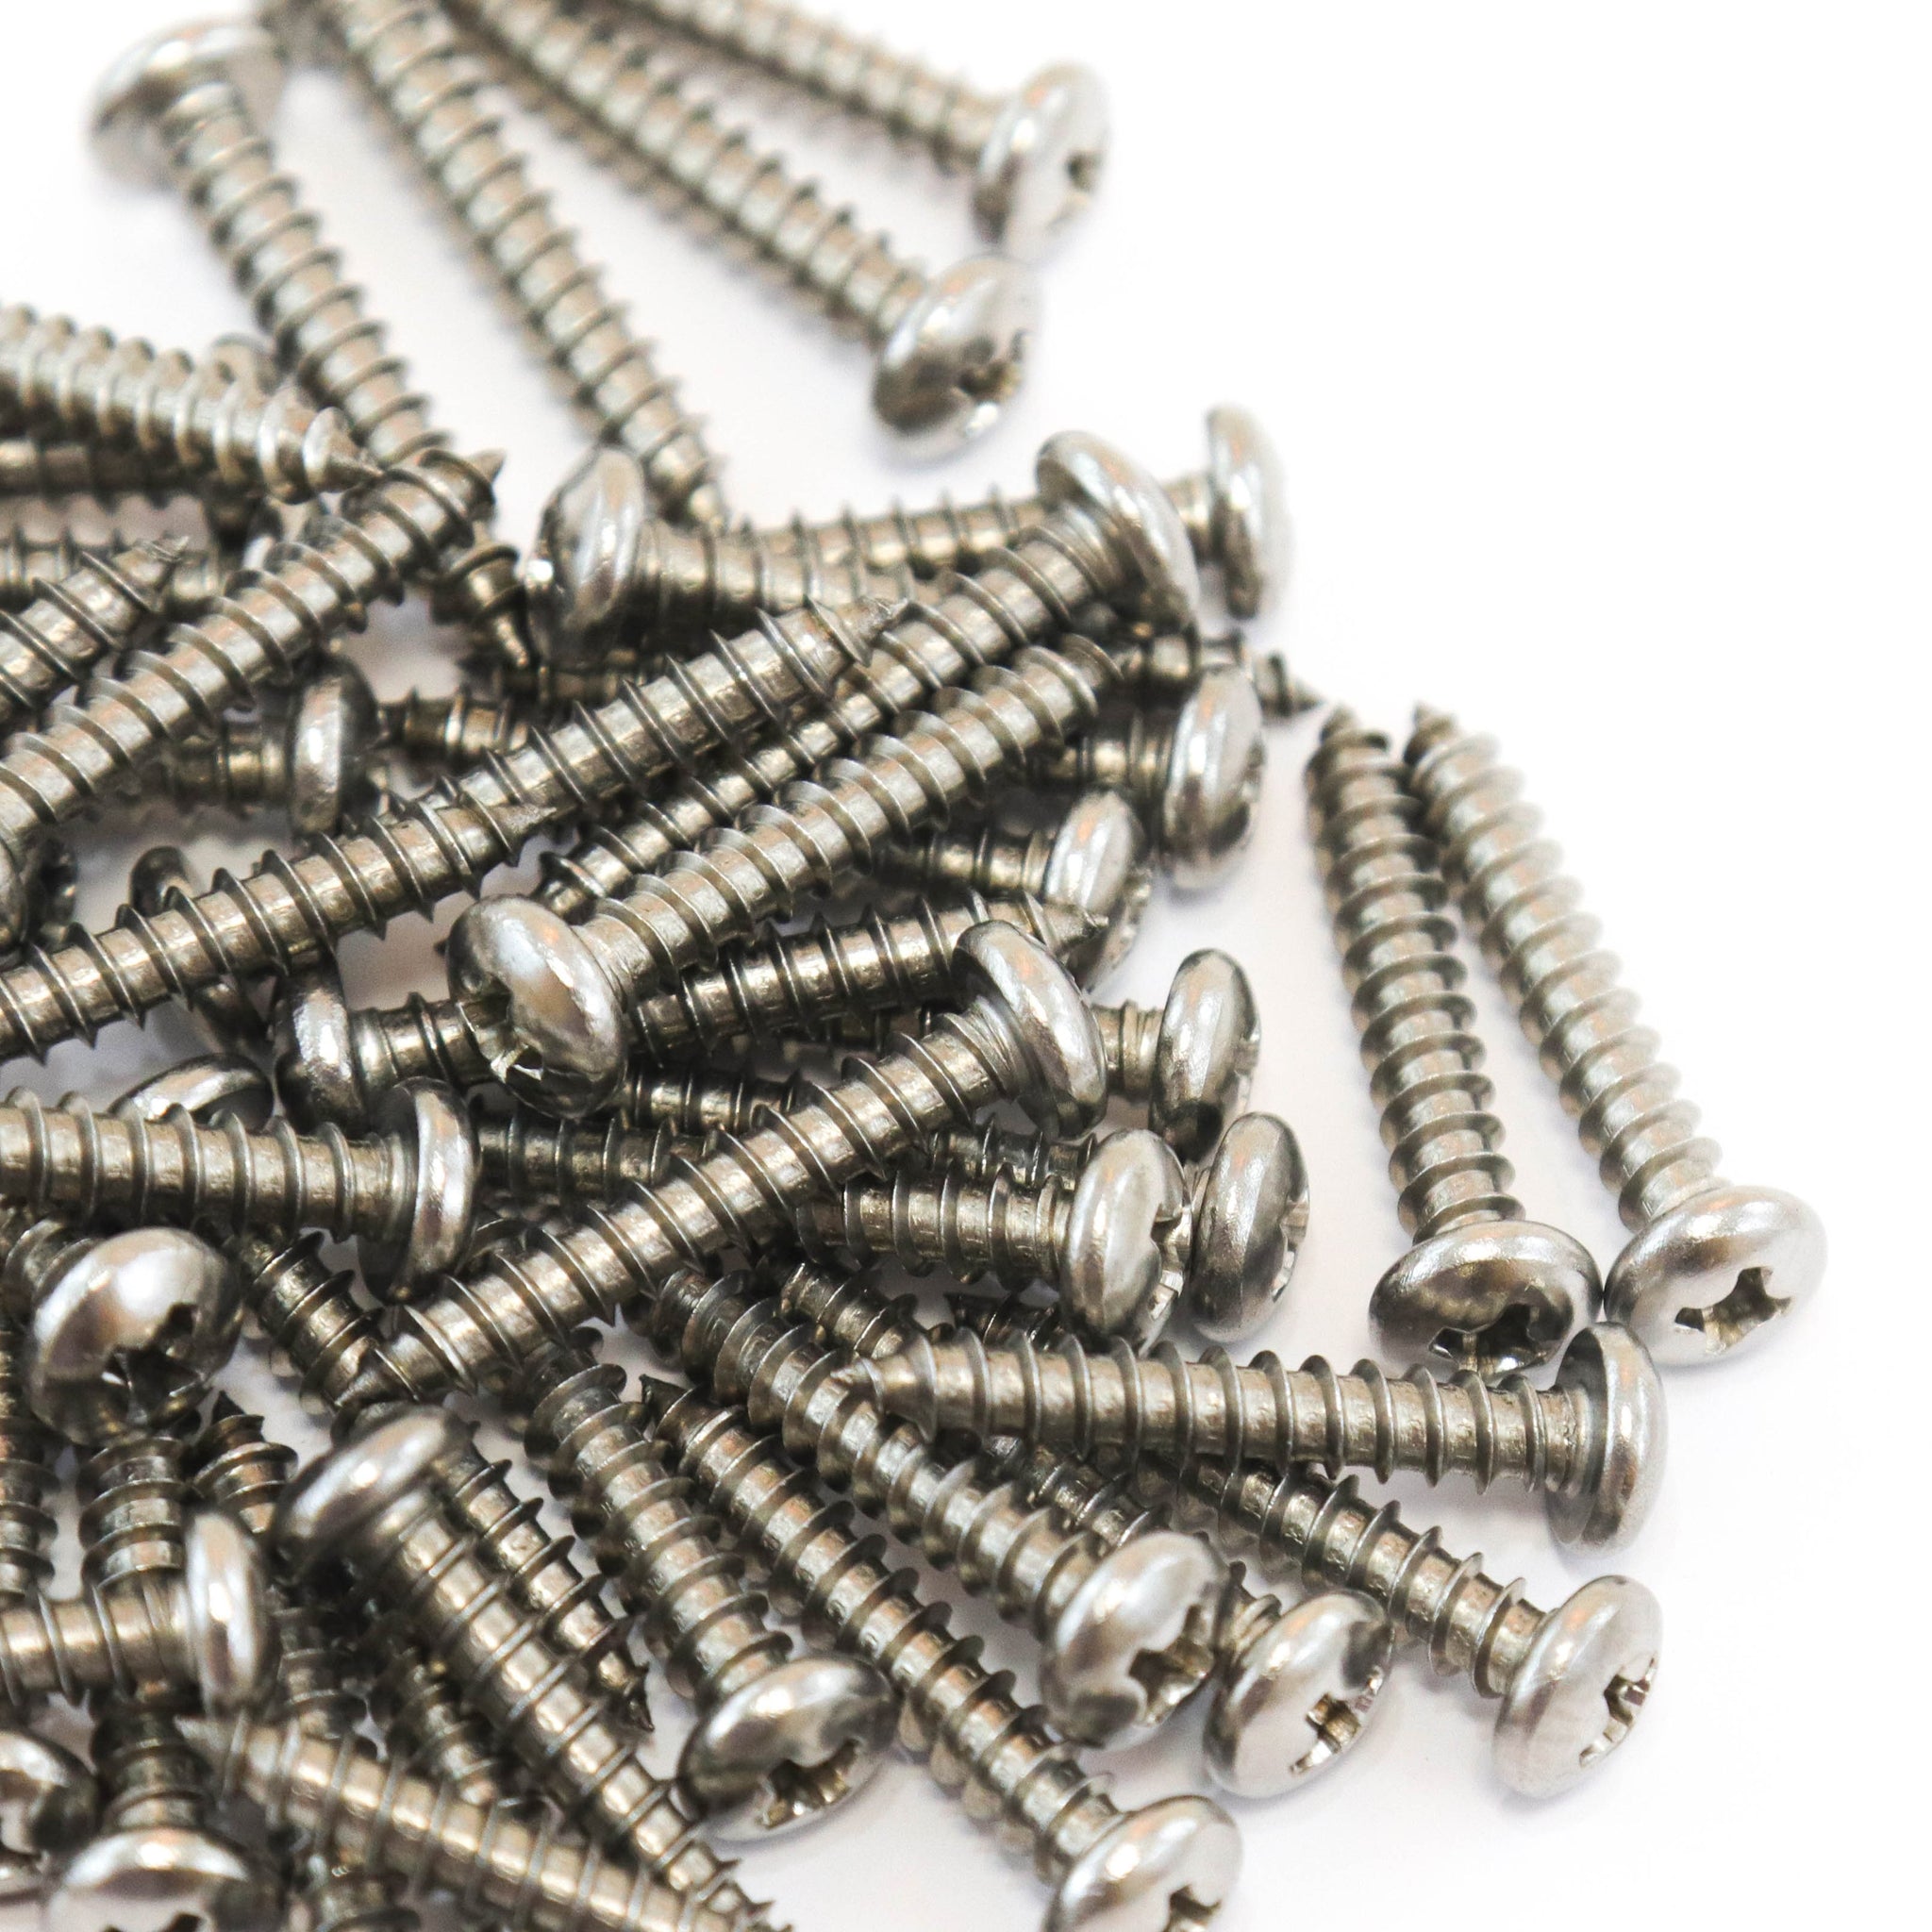 Red Hound Auto 80 Marine Pan Head Self Tapping Screw Set Type A No. 8 x 1 Inch 304 SS Stainless Steel Corrosion Resistant